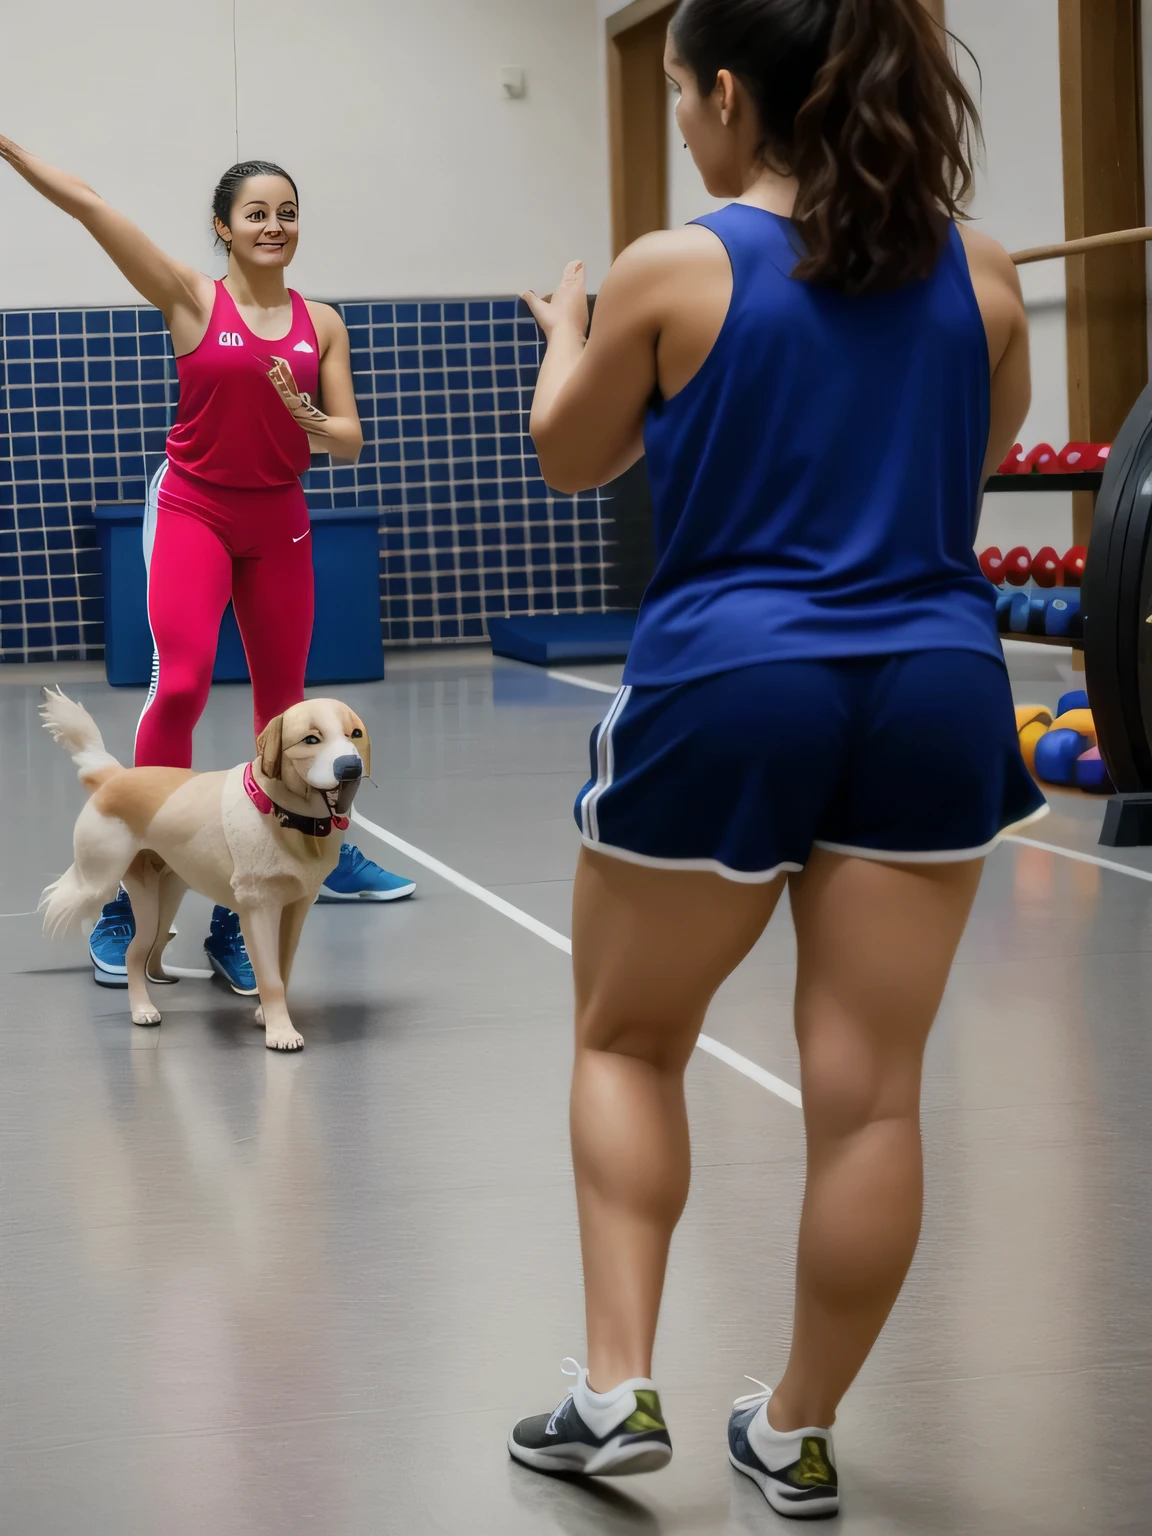 there is a woman and a dog playing with a ball, the dog is doing a ballet dance, by Amelia Peláez, with dogs, in a gym, dancing in the background, lunging at camera :4, the photo shows a large, by Samuel Silva, standing on two legs, malika favre, person in foreground, not blurry